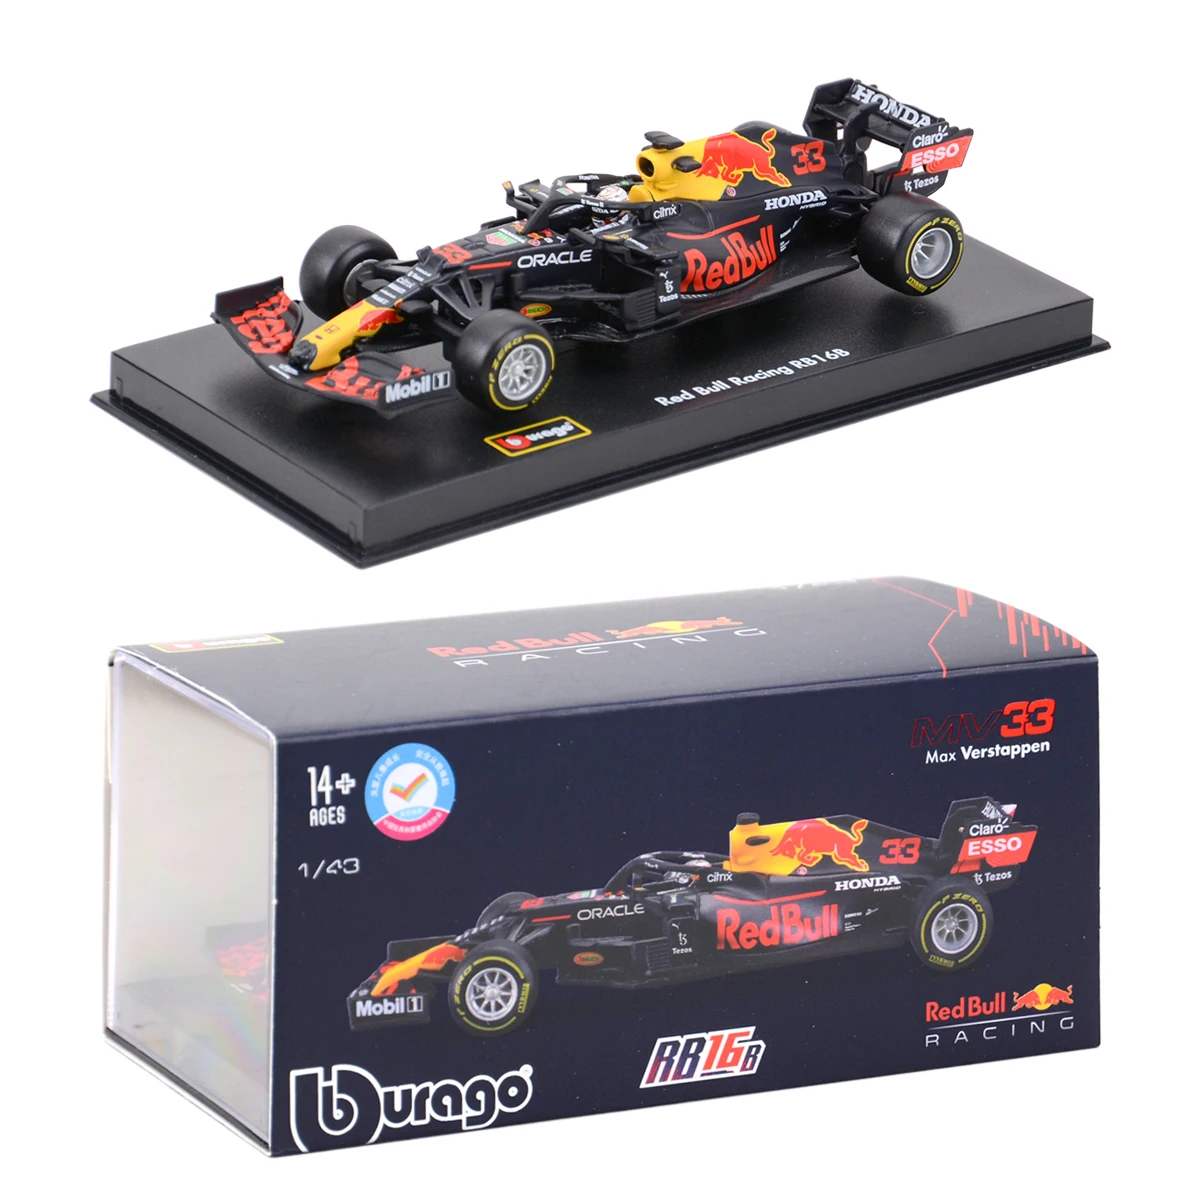 Collection of High Quality Diecast Metal Toy Model Cars by Burago 1:43 Scale